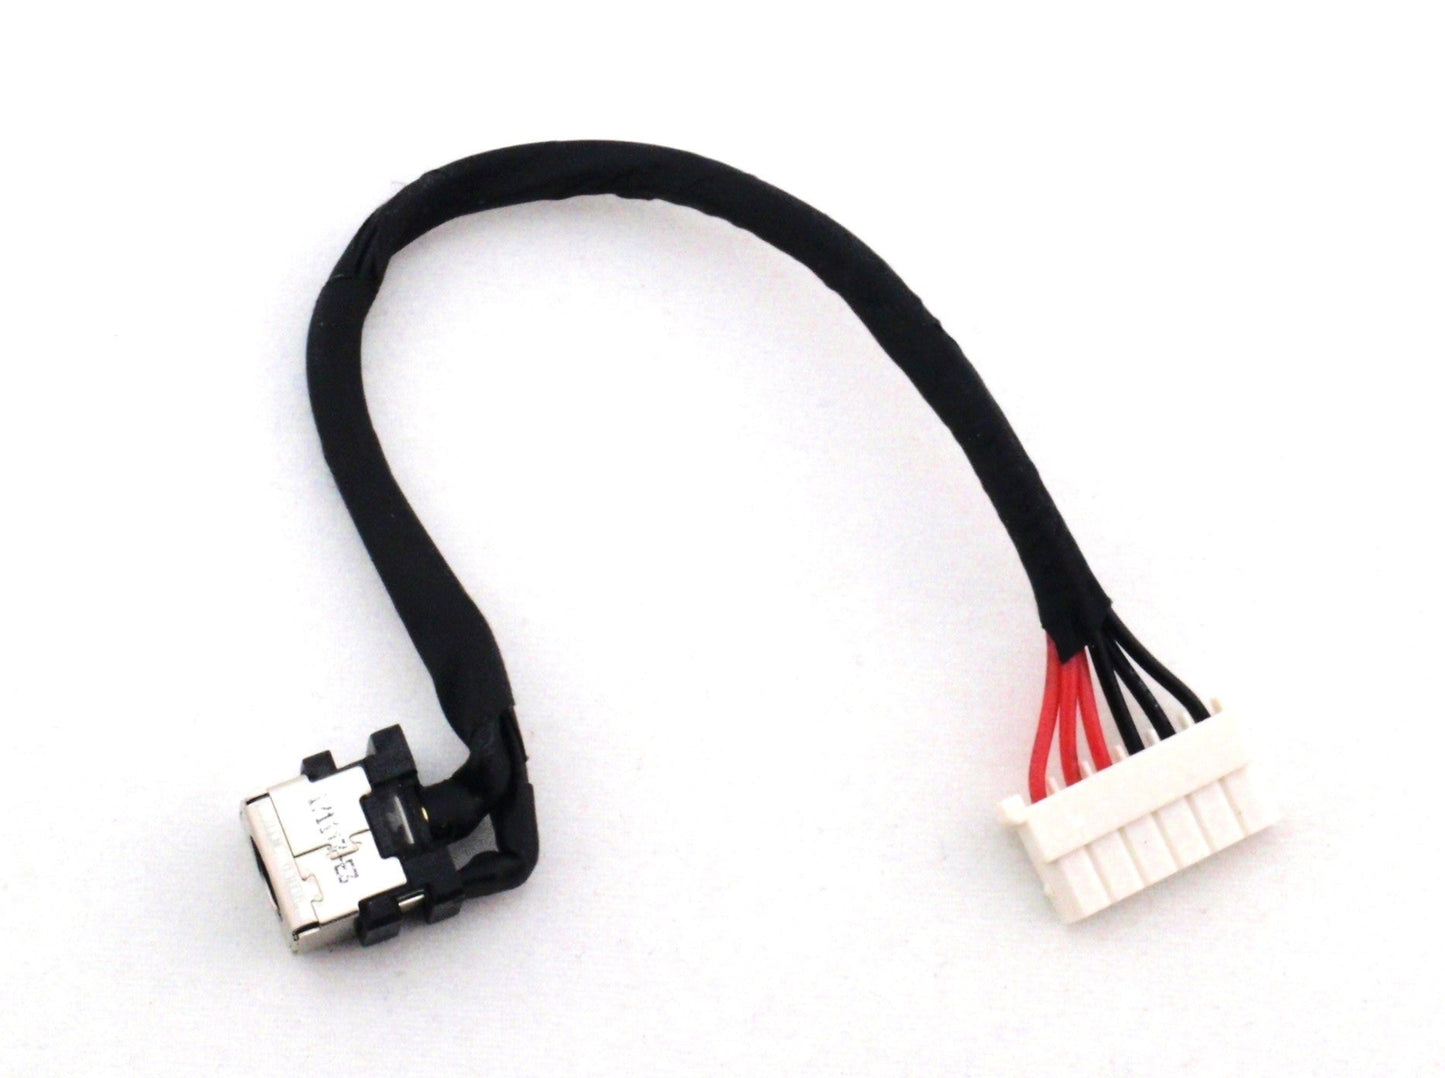 ASUS DC In Power Jack Charging Port Cable TUF FX504 FX504G FX504GD FX504GE FX504GM FX80G FX80GD FX80GE 14026-00010300 DDBKLGAD000